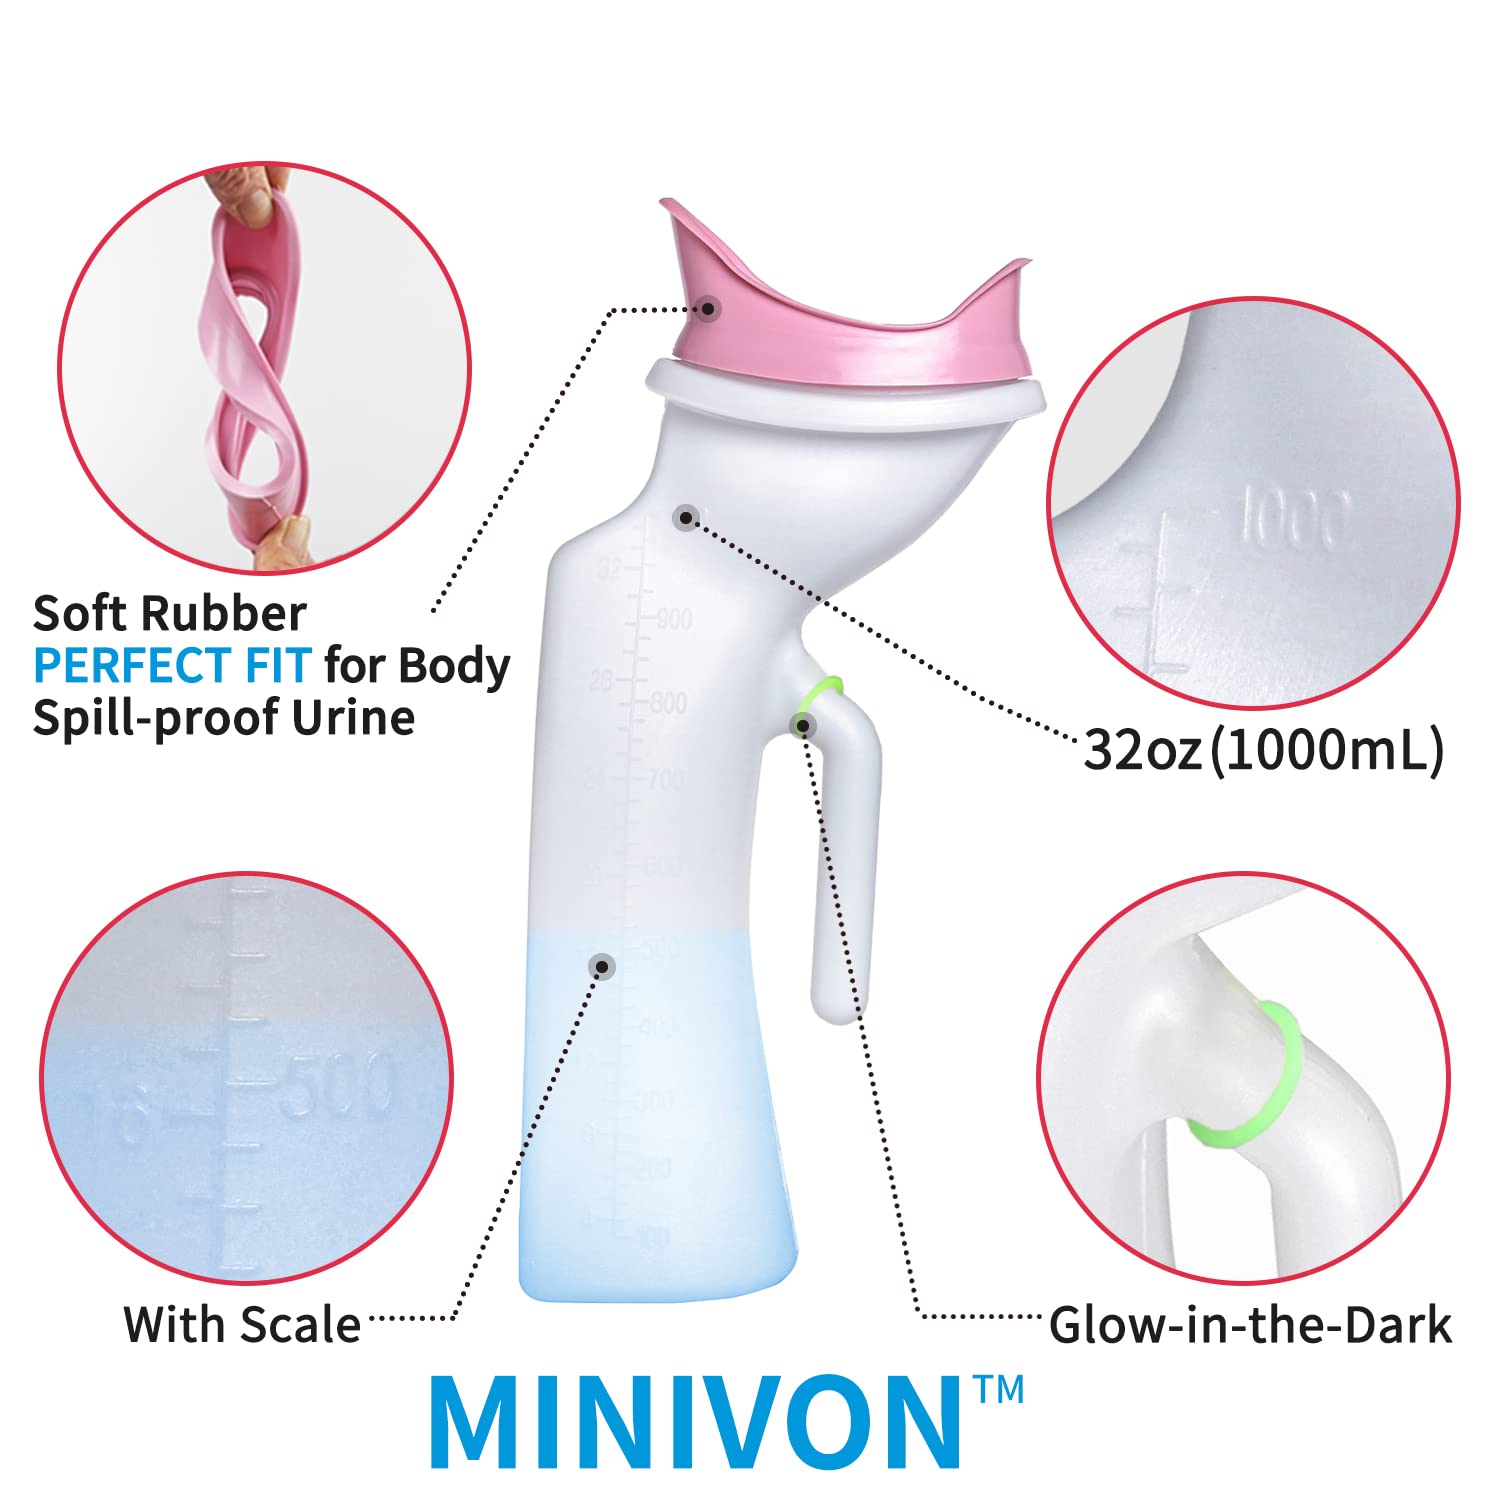 MINIVON Female Urinal for Women - 32oz/1000mL Pee Bottle Bedside, Glow in The Dark Urination Device for Elderly Bedridden Patients in Bed, Urinary Chamber Portable Urine Bottle for Travel